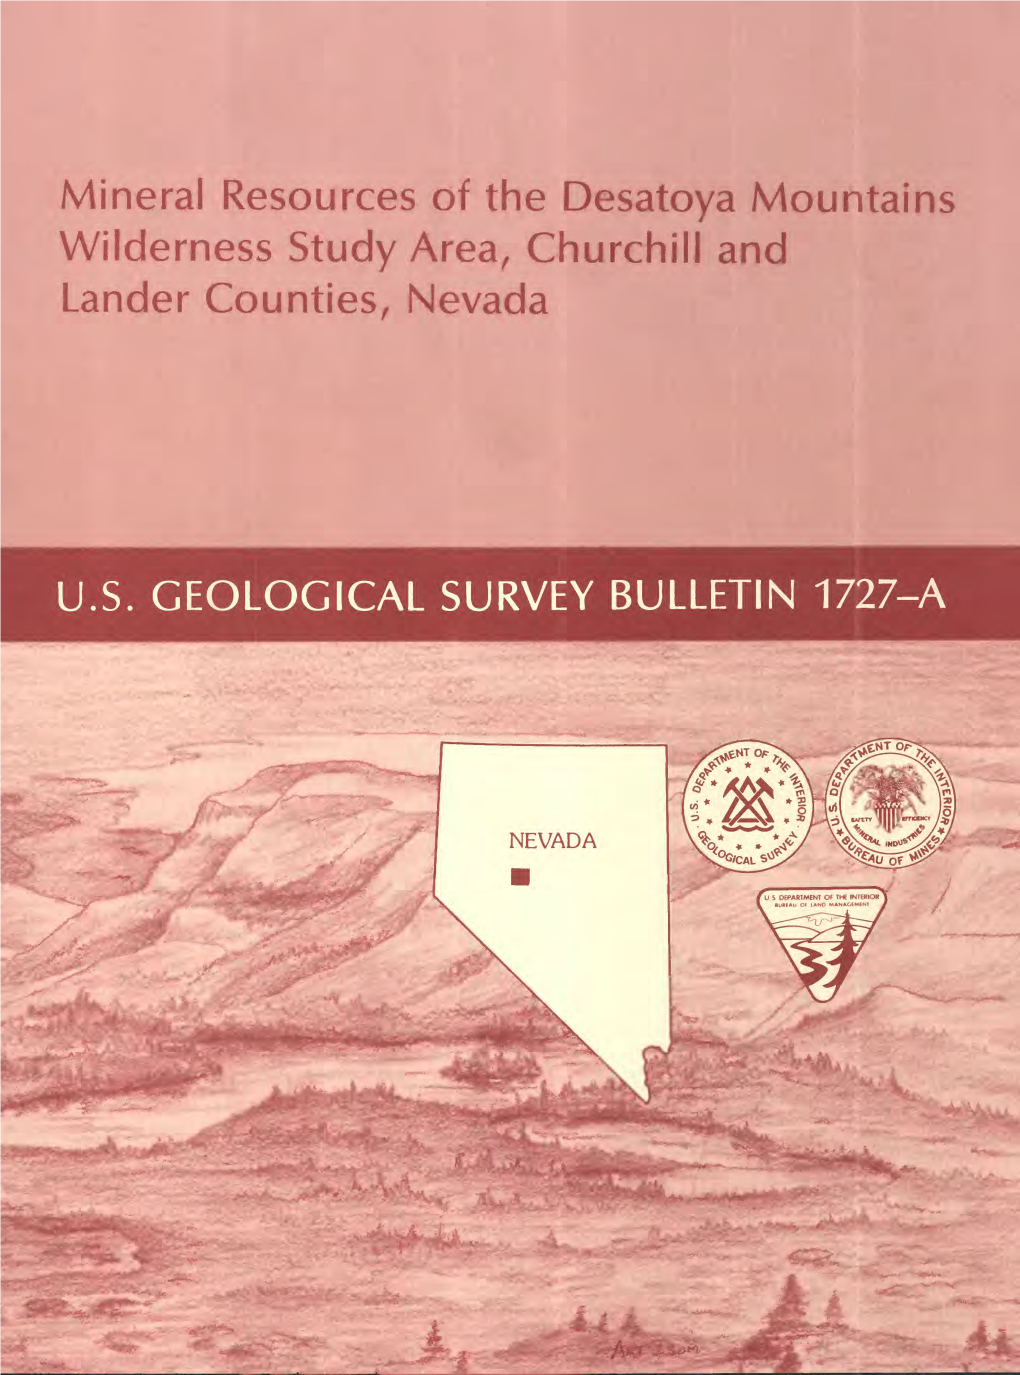 Mineral Resources of the Desatoya Mountains Wilderness Study Area, Churchill and Lander Counties, Nevada